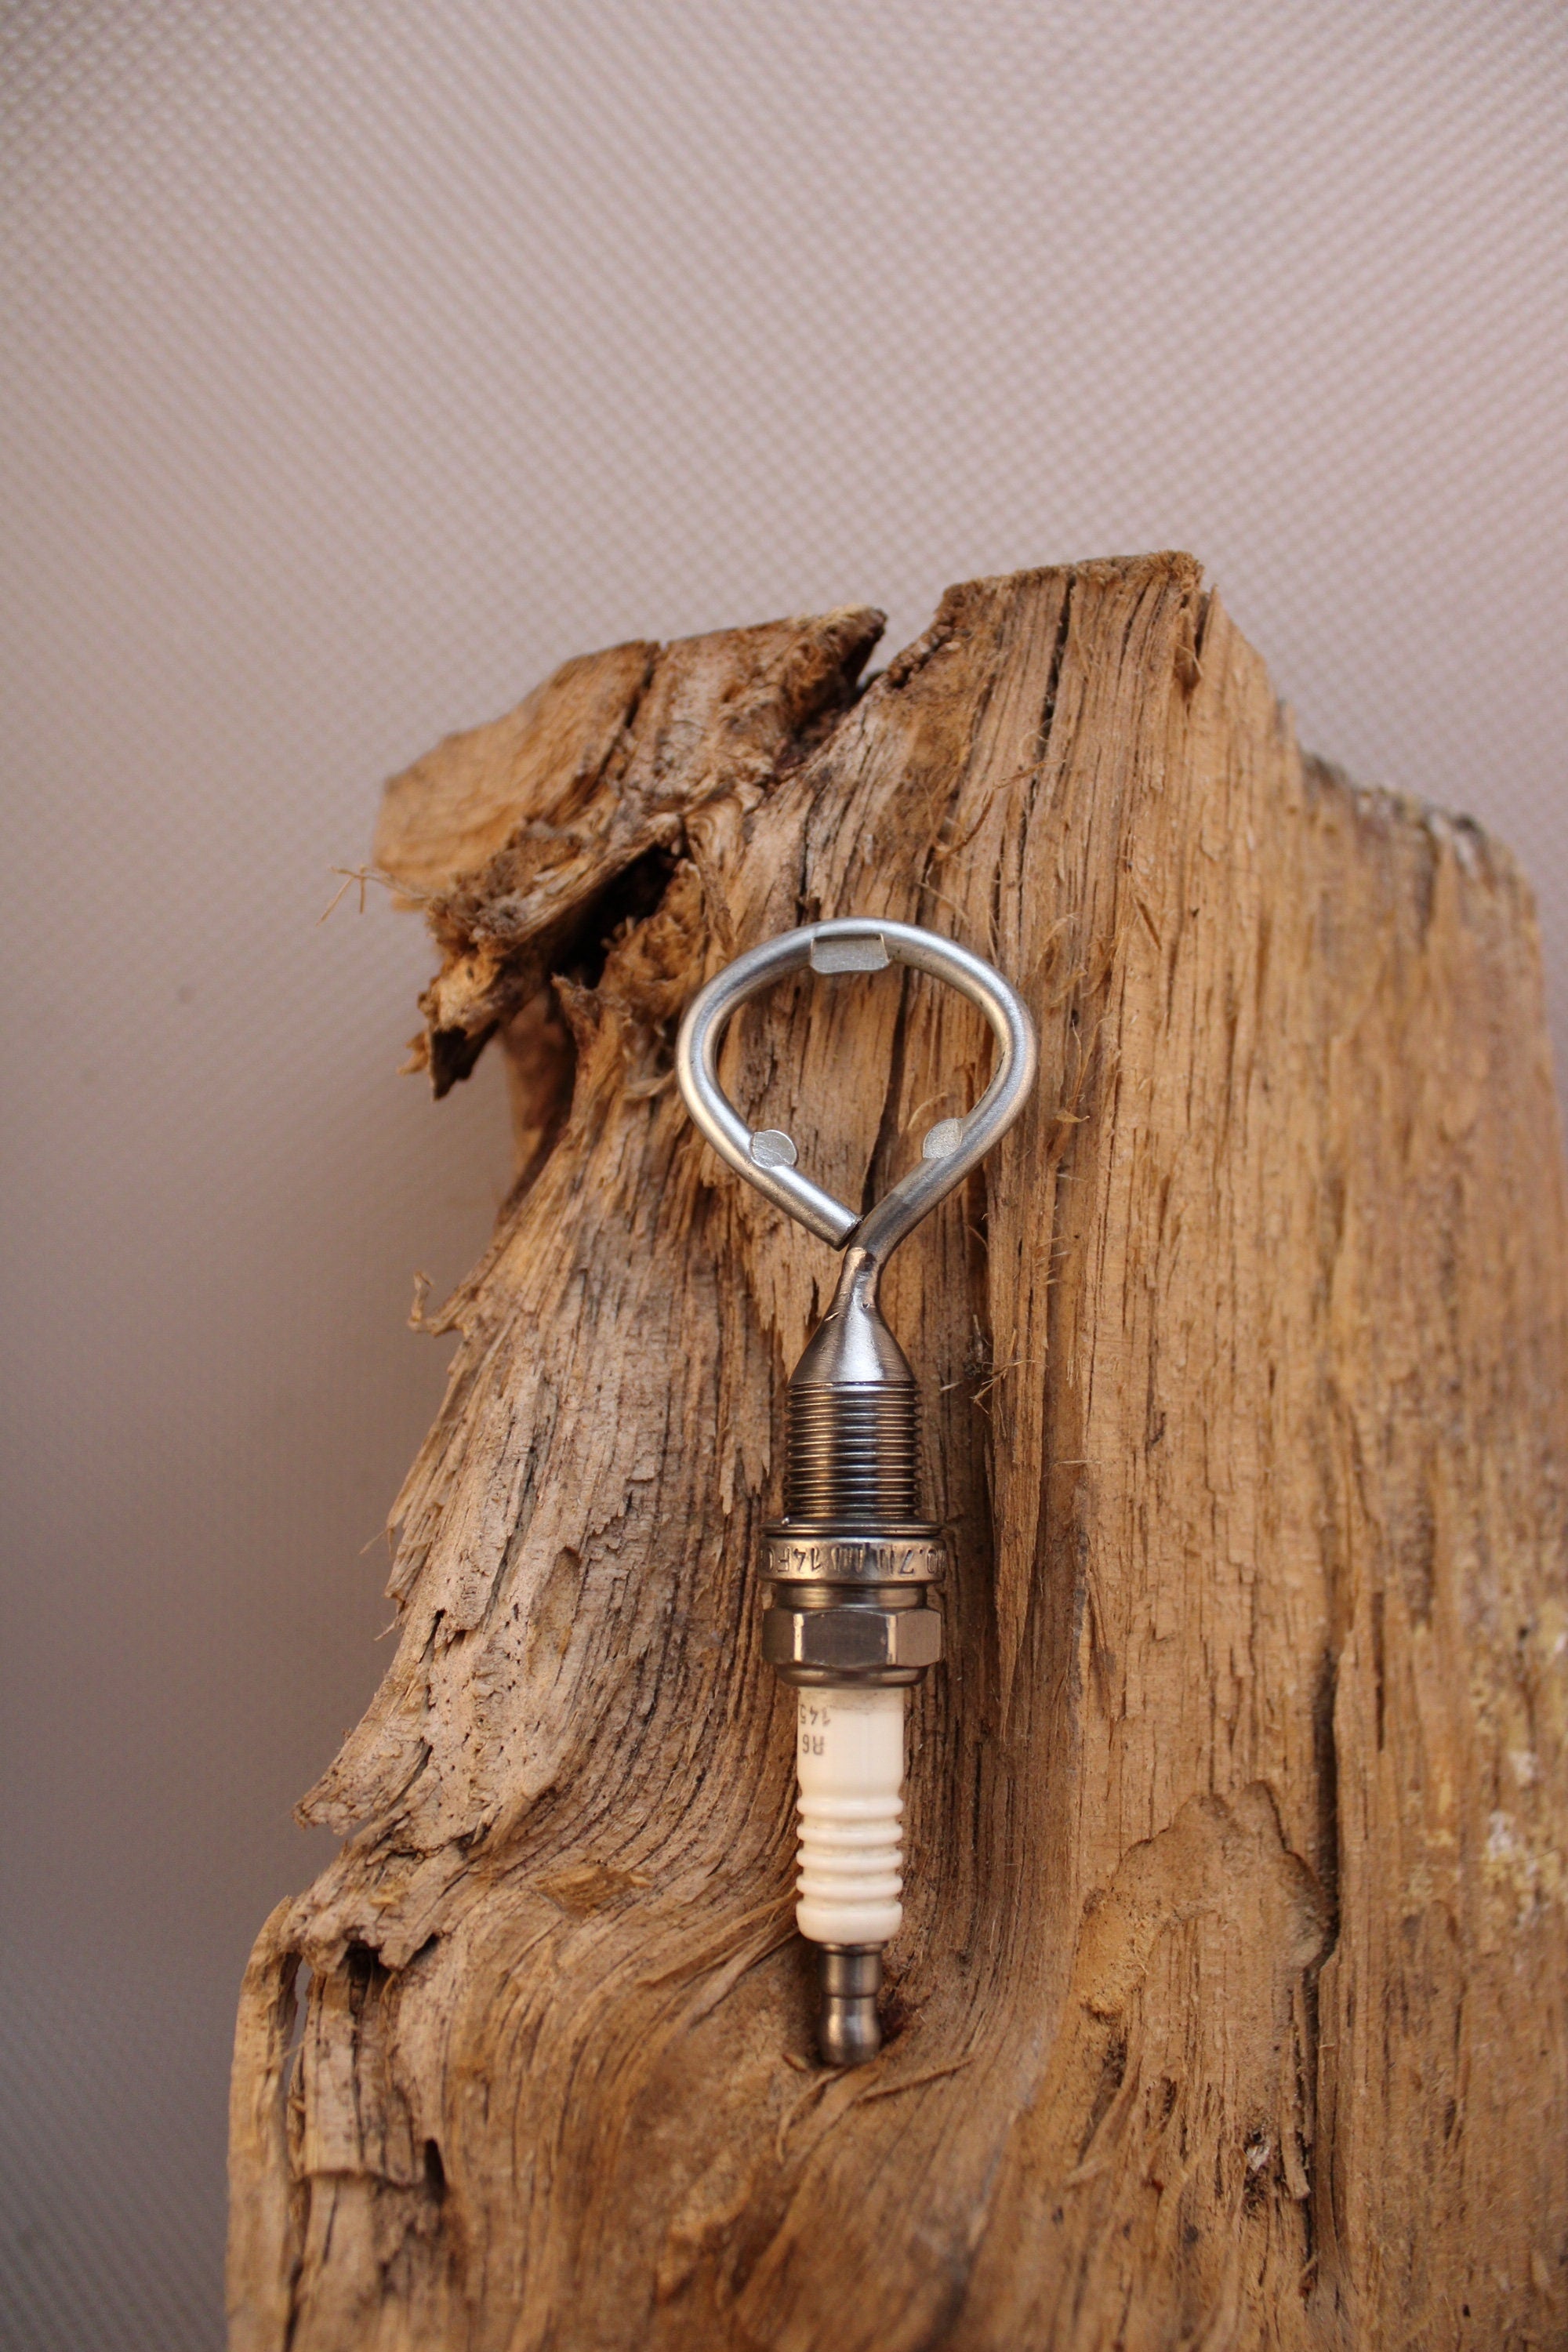 Bottle opener made from a car's spark plug.